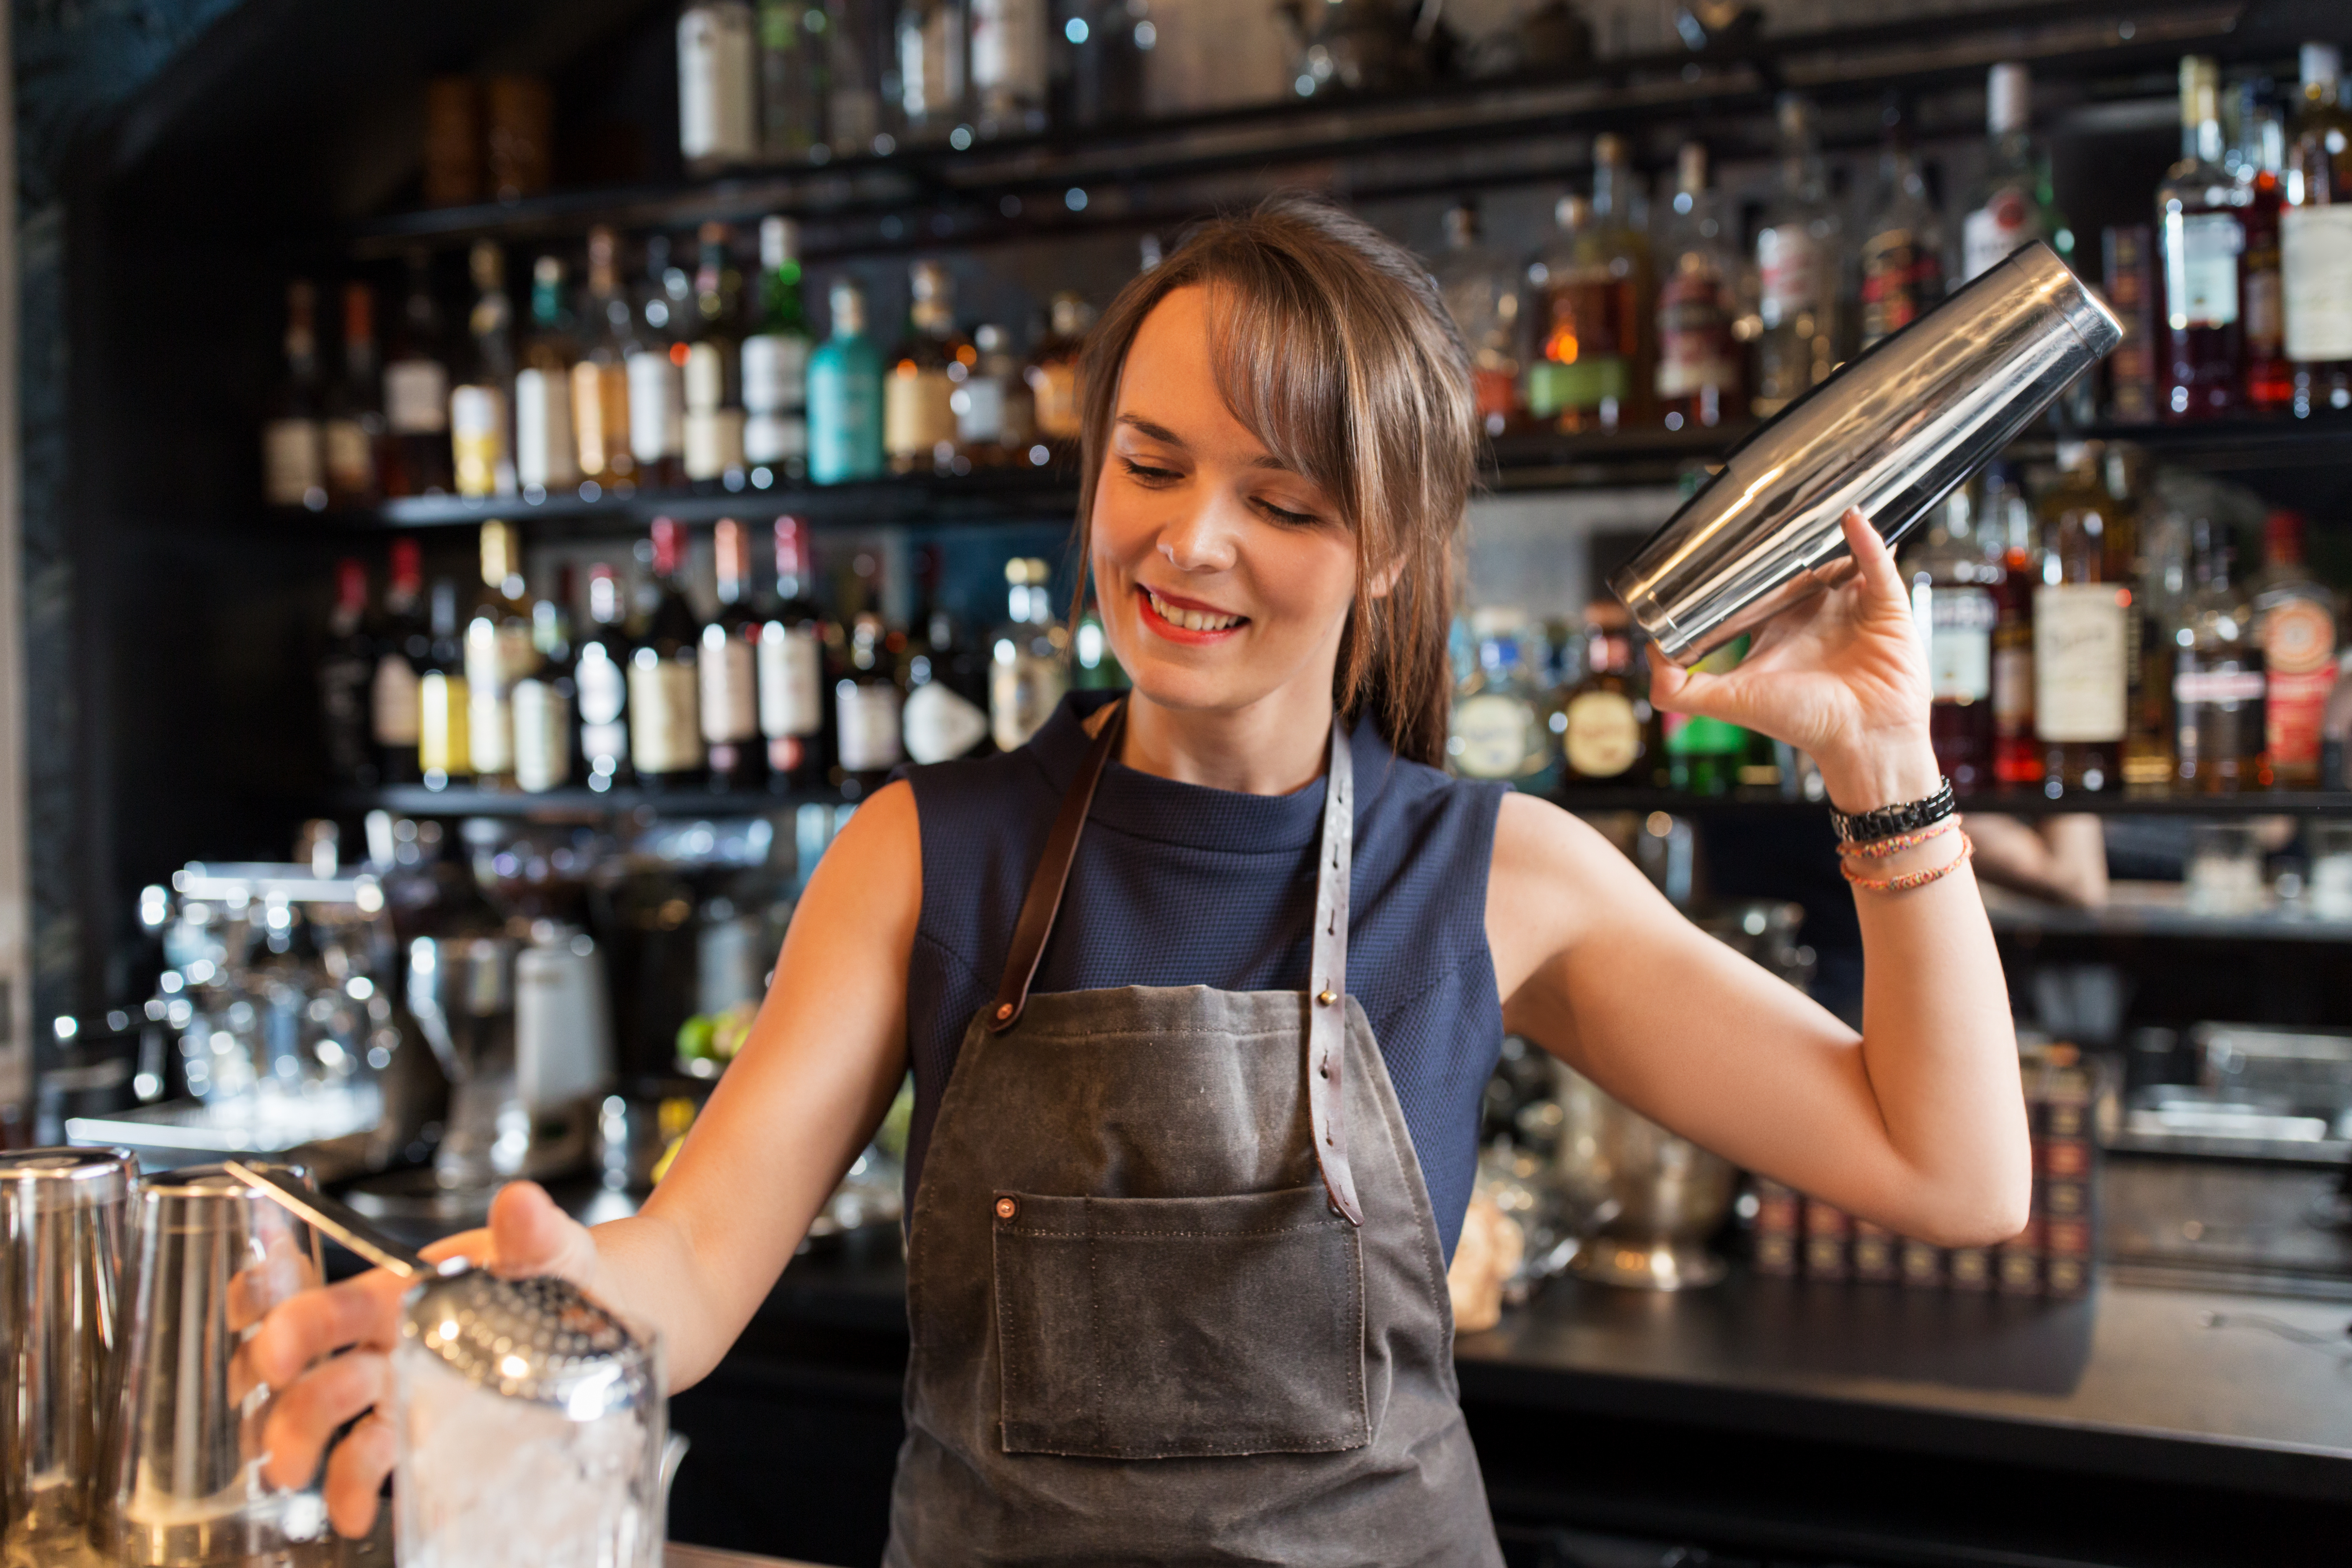 A woman bartender shaking a cocktail behind the bar.